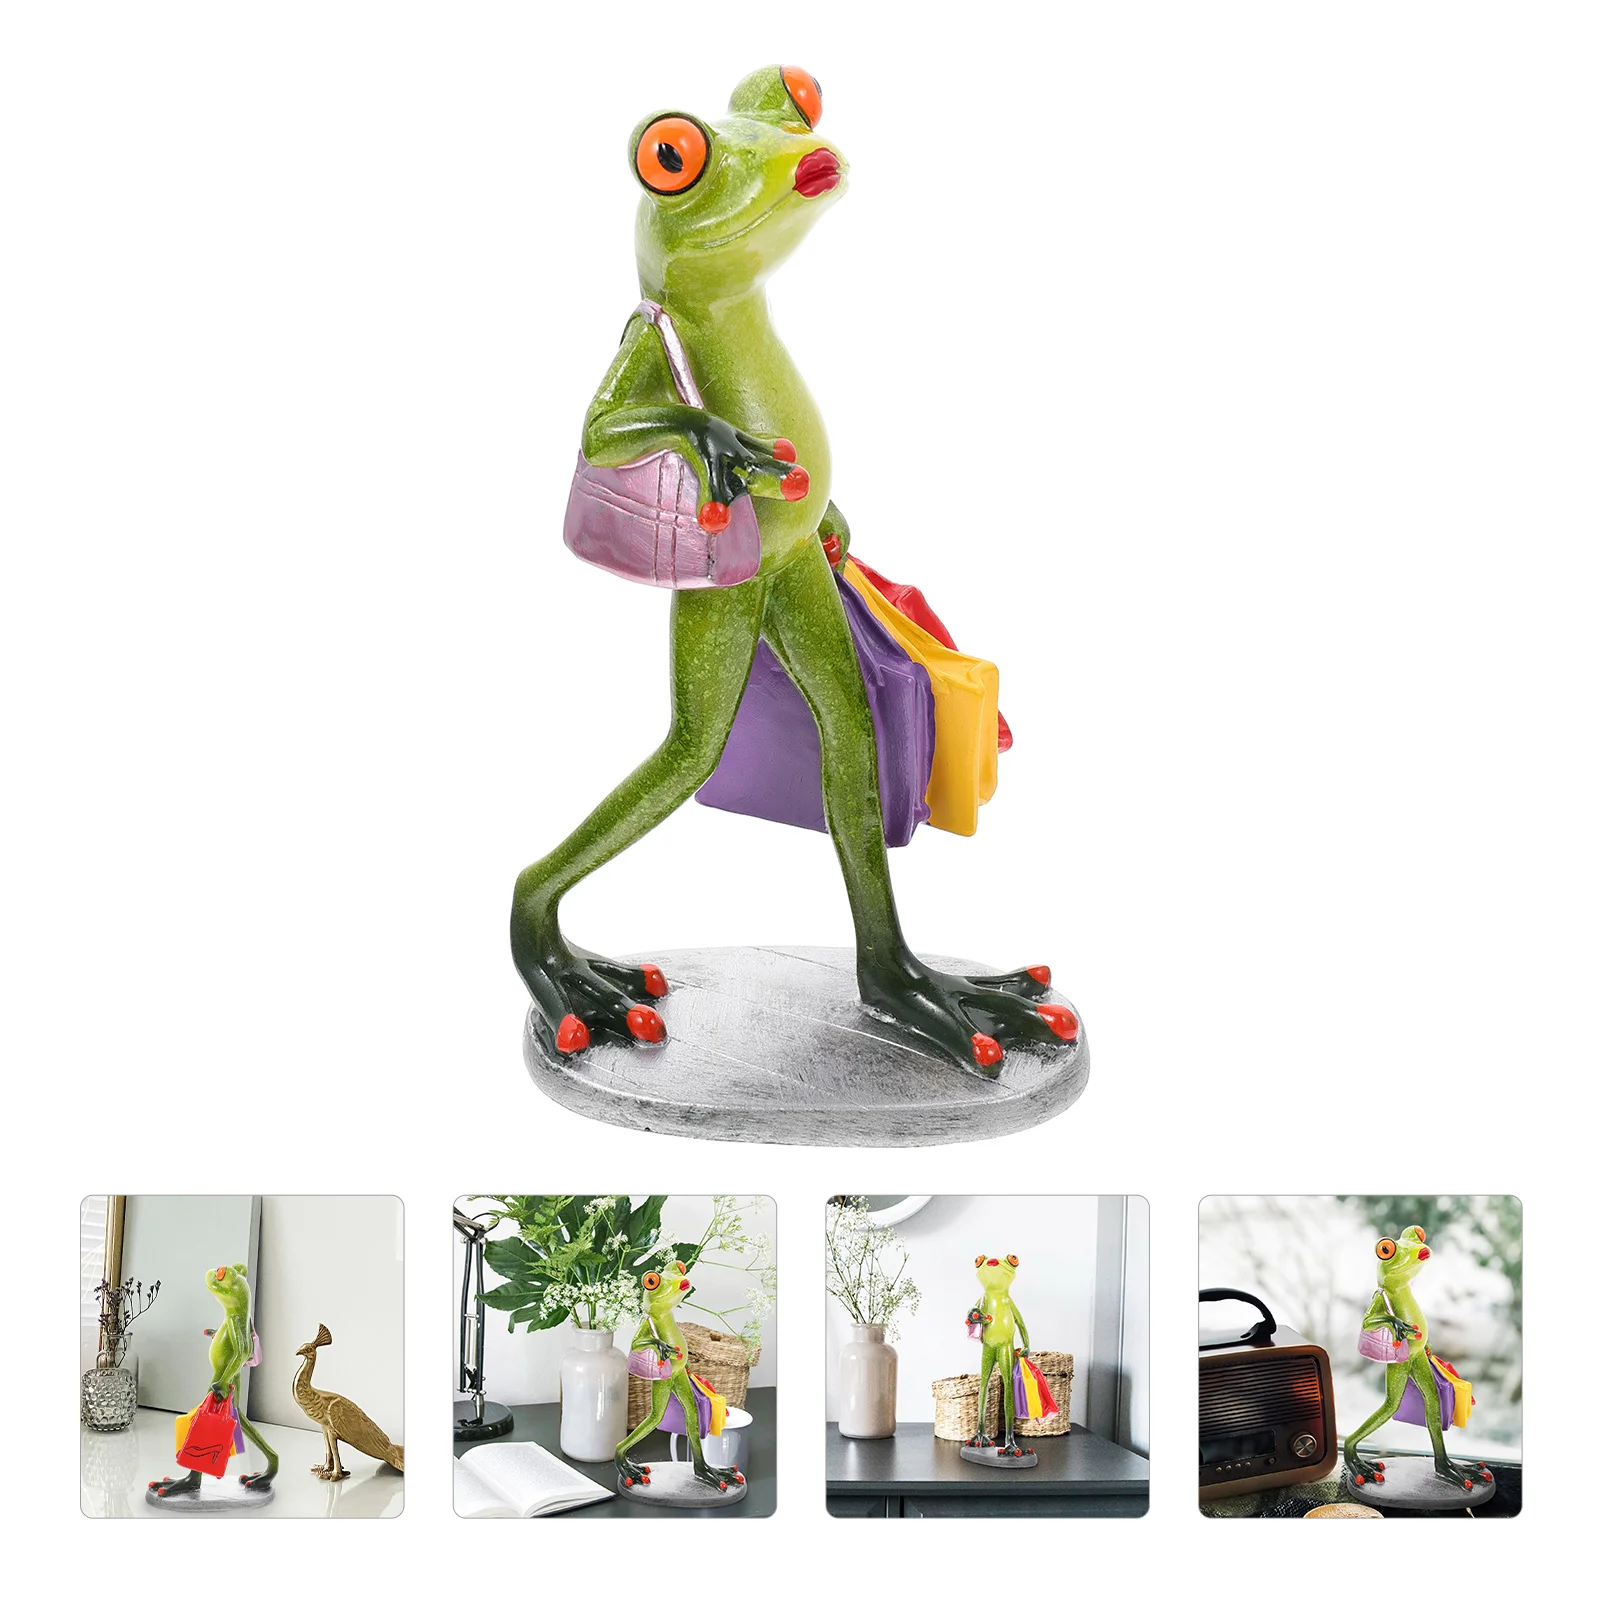 

Frog Statue Animal Garden Figurine Resin Figurines Outdoor Ornament Frogs Sculptures Funny Lawn Realistic